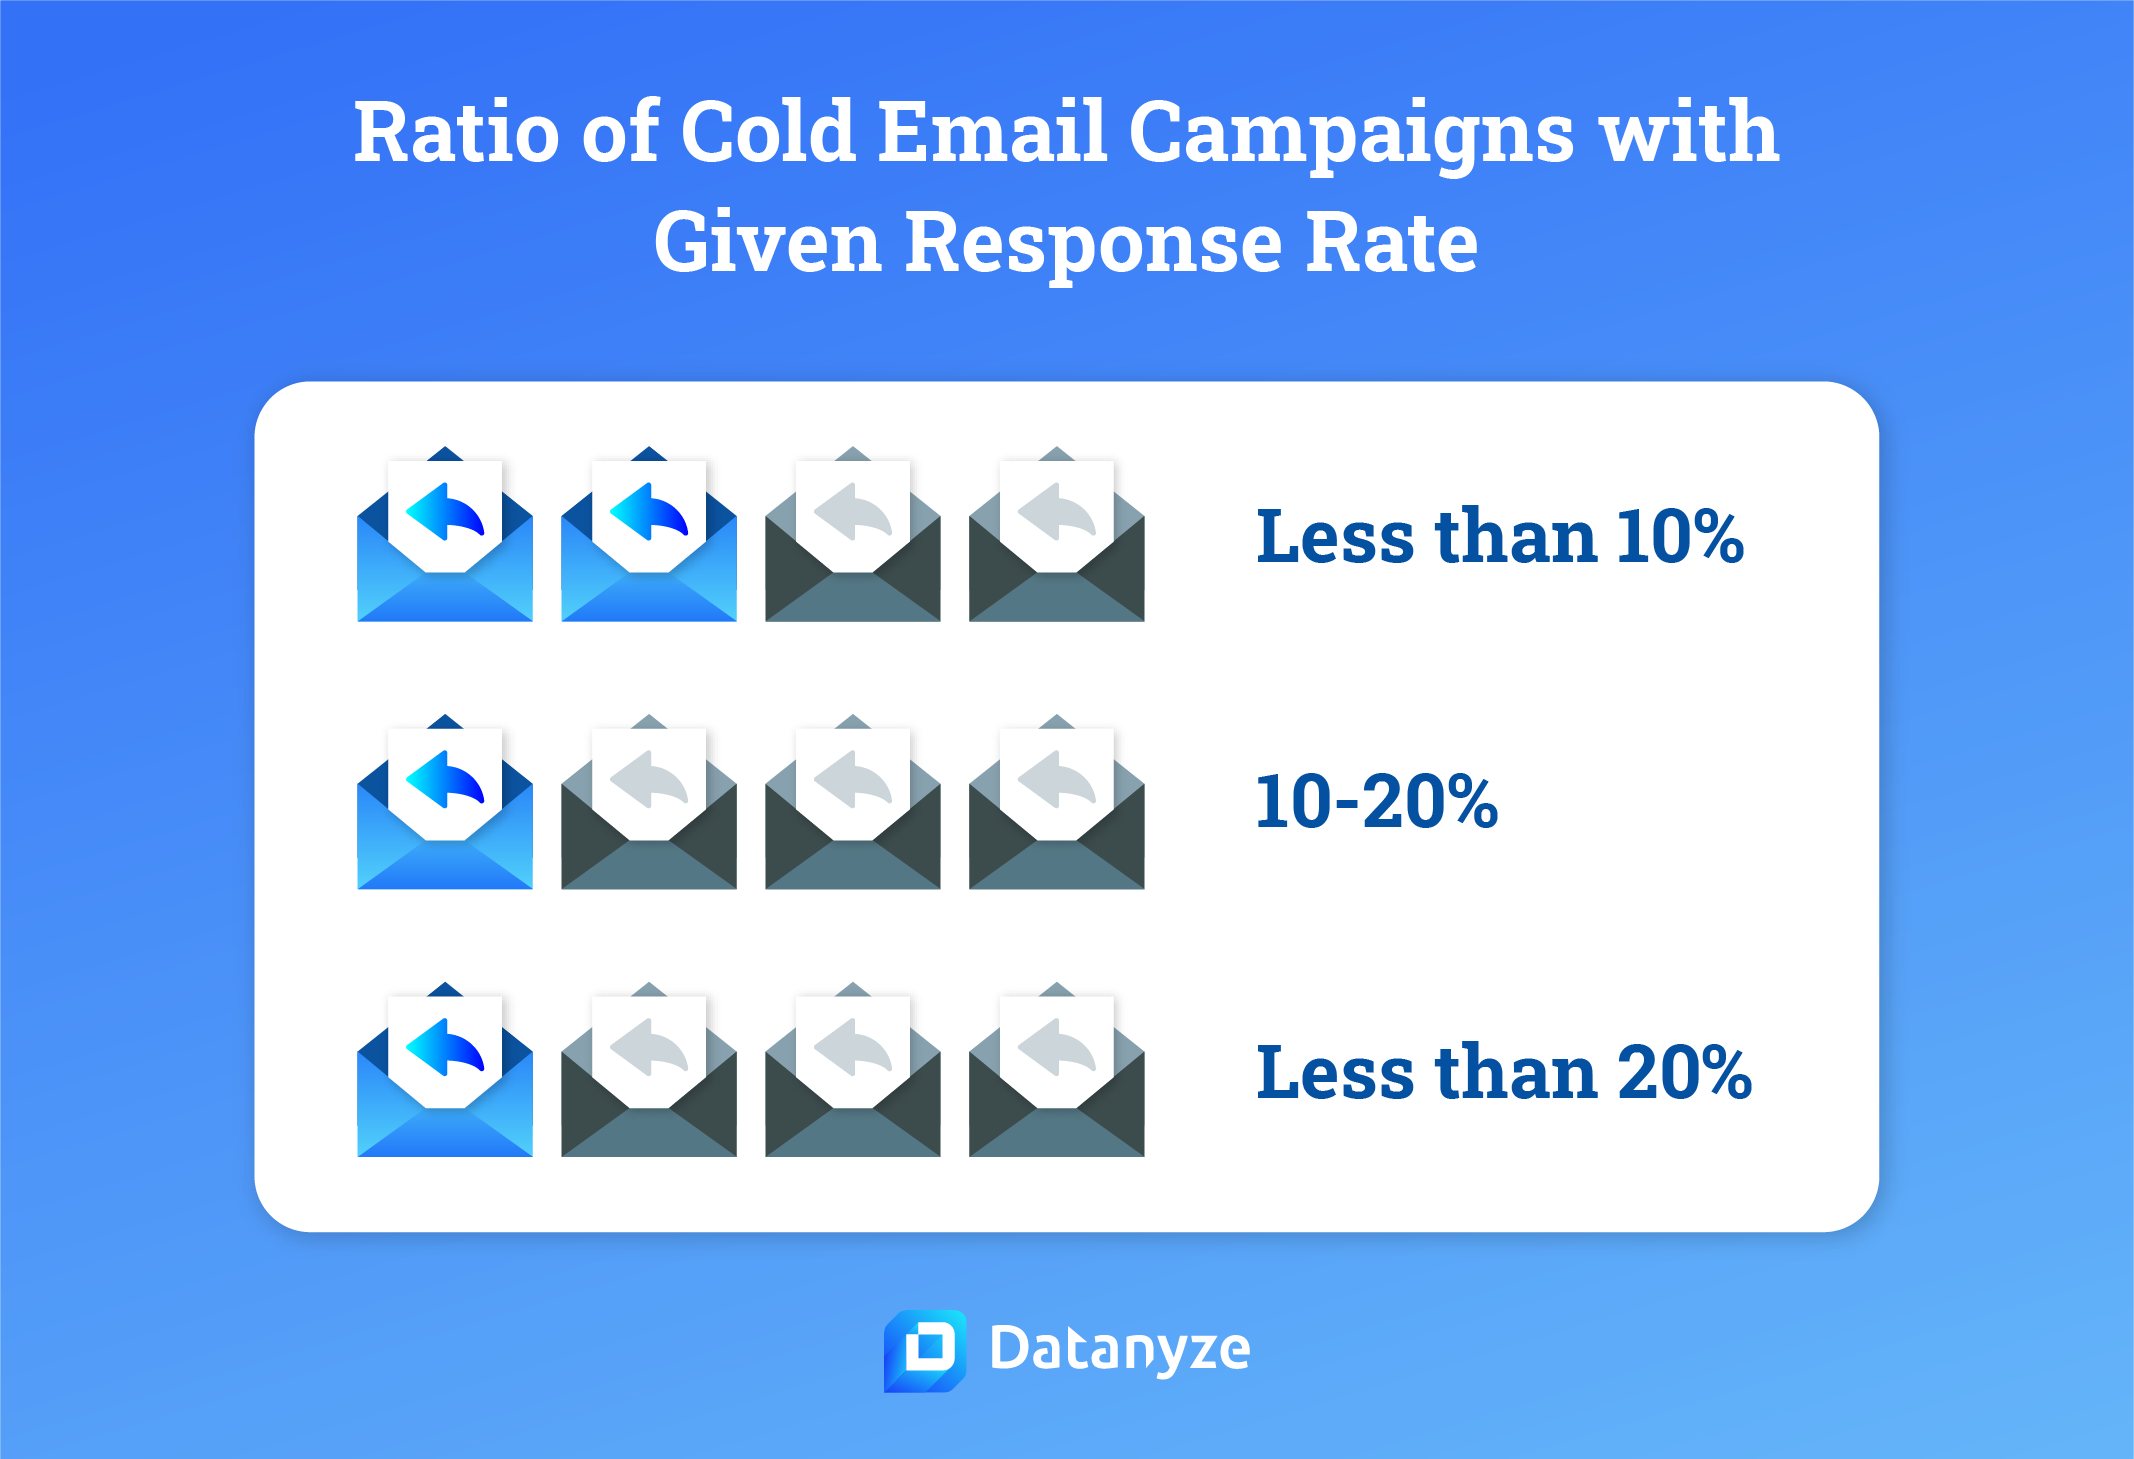 Ratio of cold email campaigns with given response rate